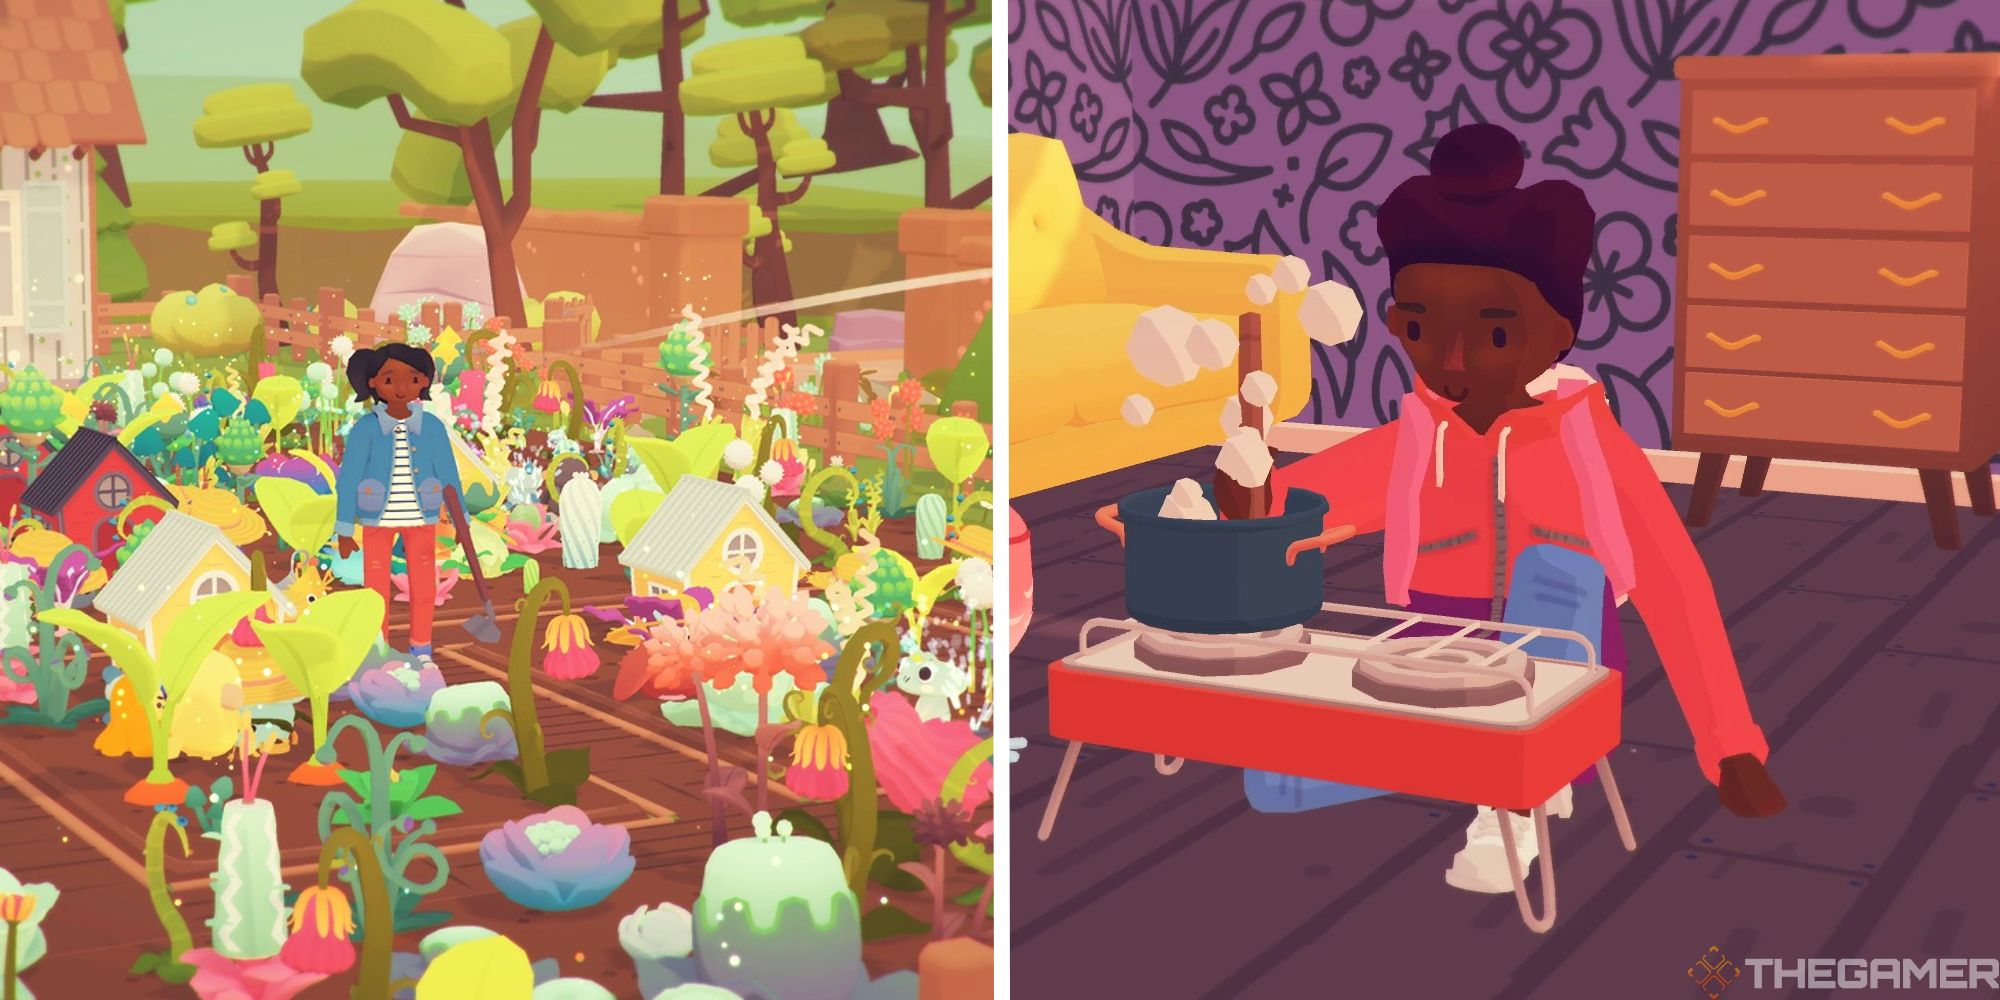 image of farm next to image of player cooking food